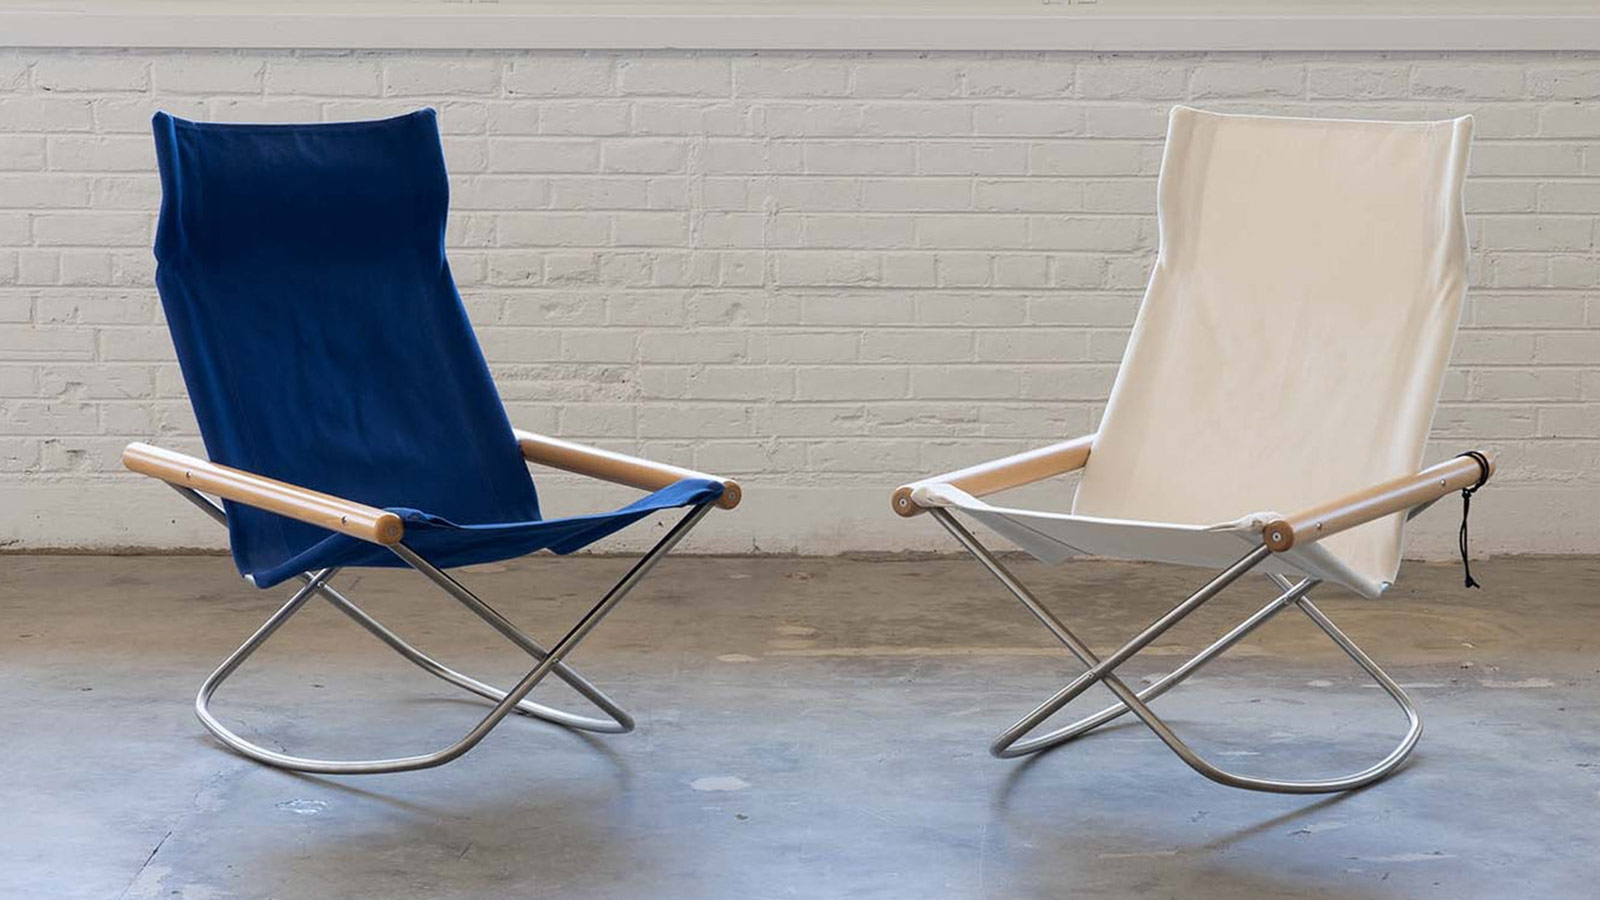 NYCHAIR X Rocking Chair by Takeshi Nii